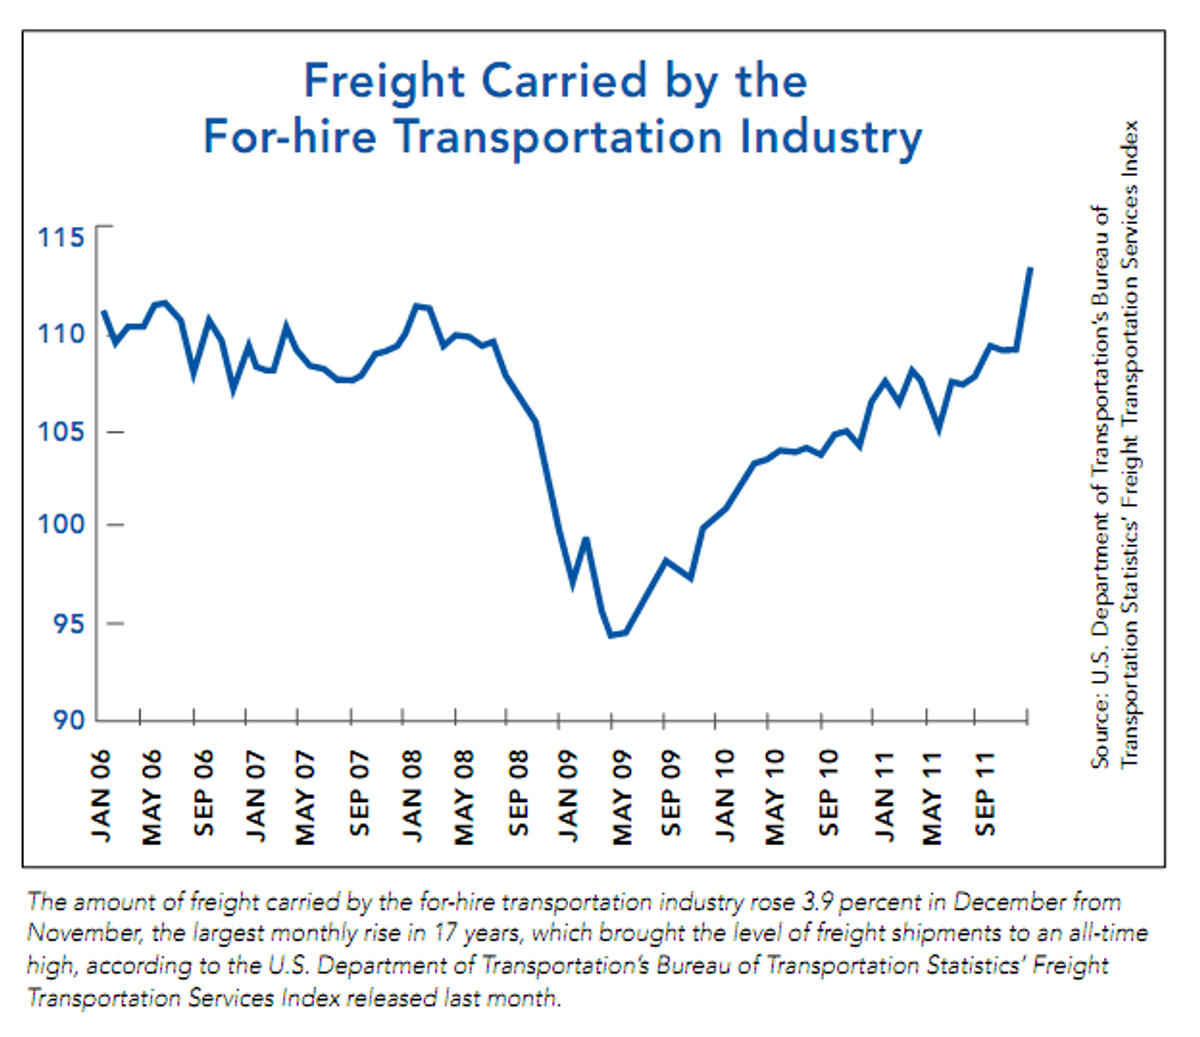 Freight Levels on the Rise